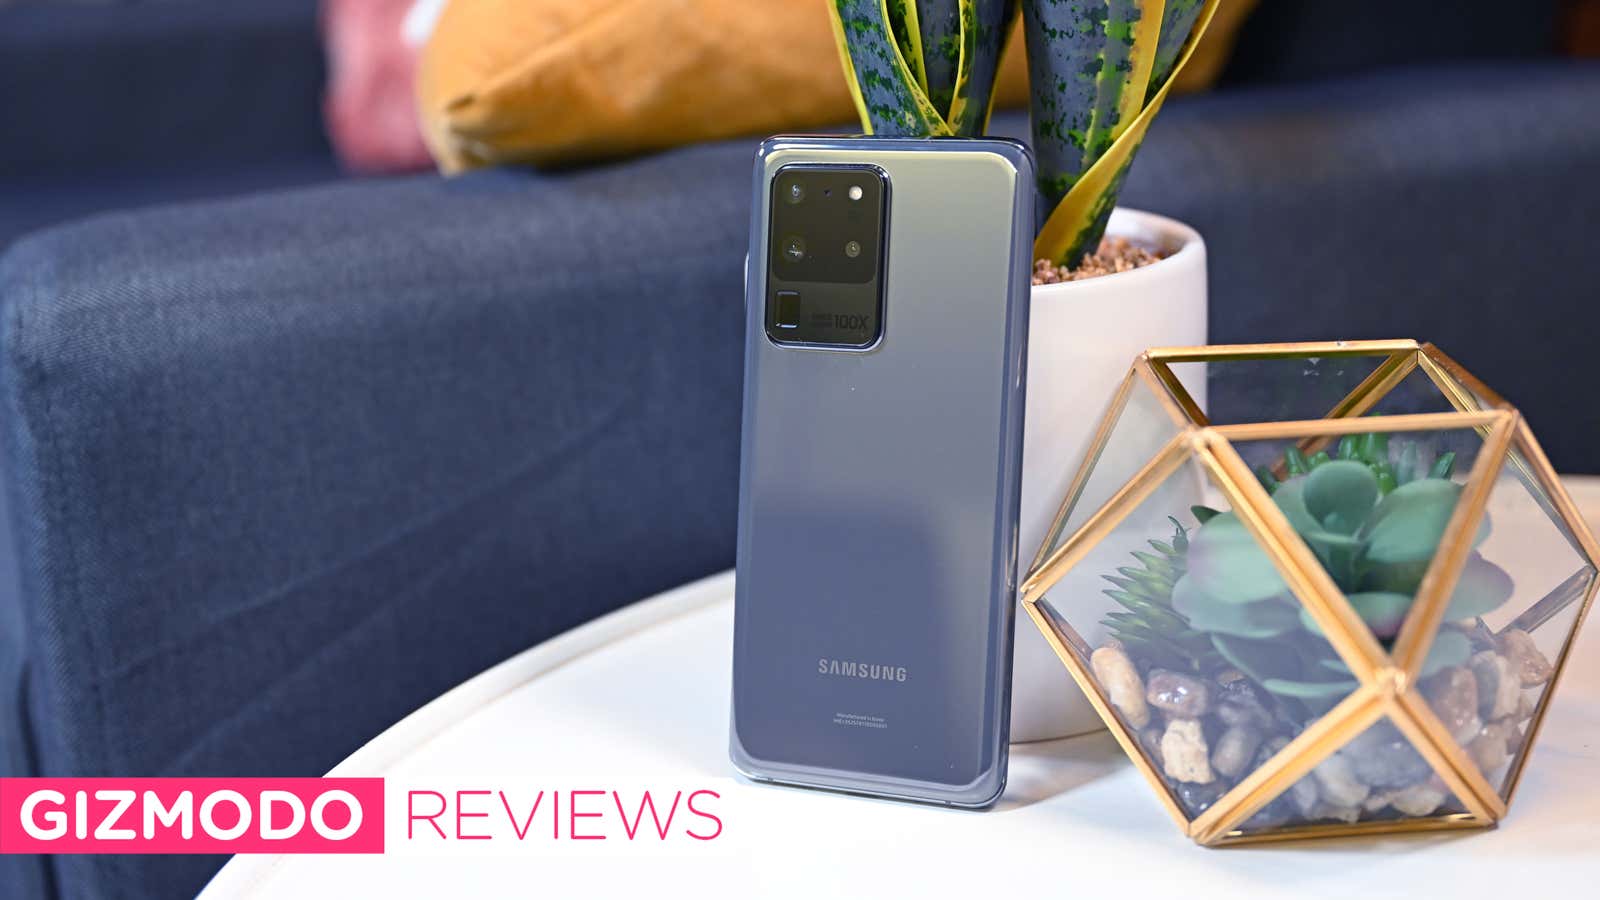 Galaxy S20 Ultra 5G Review: An imperfect $1,399 smartphone